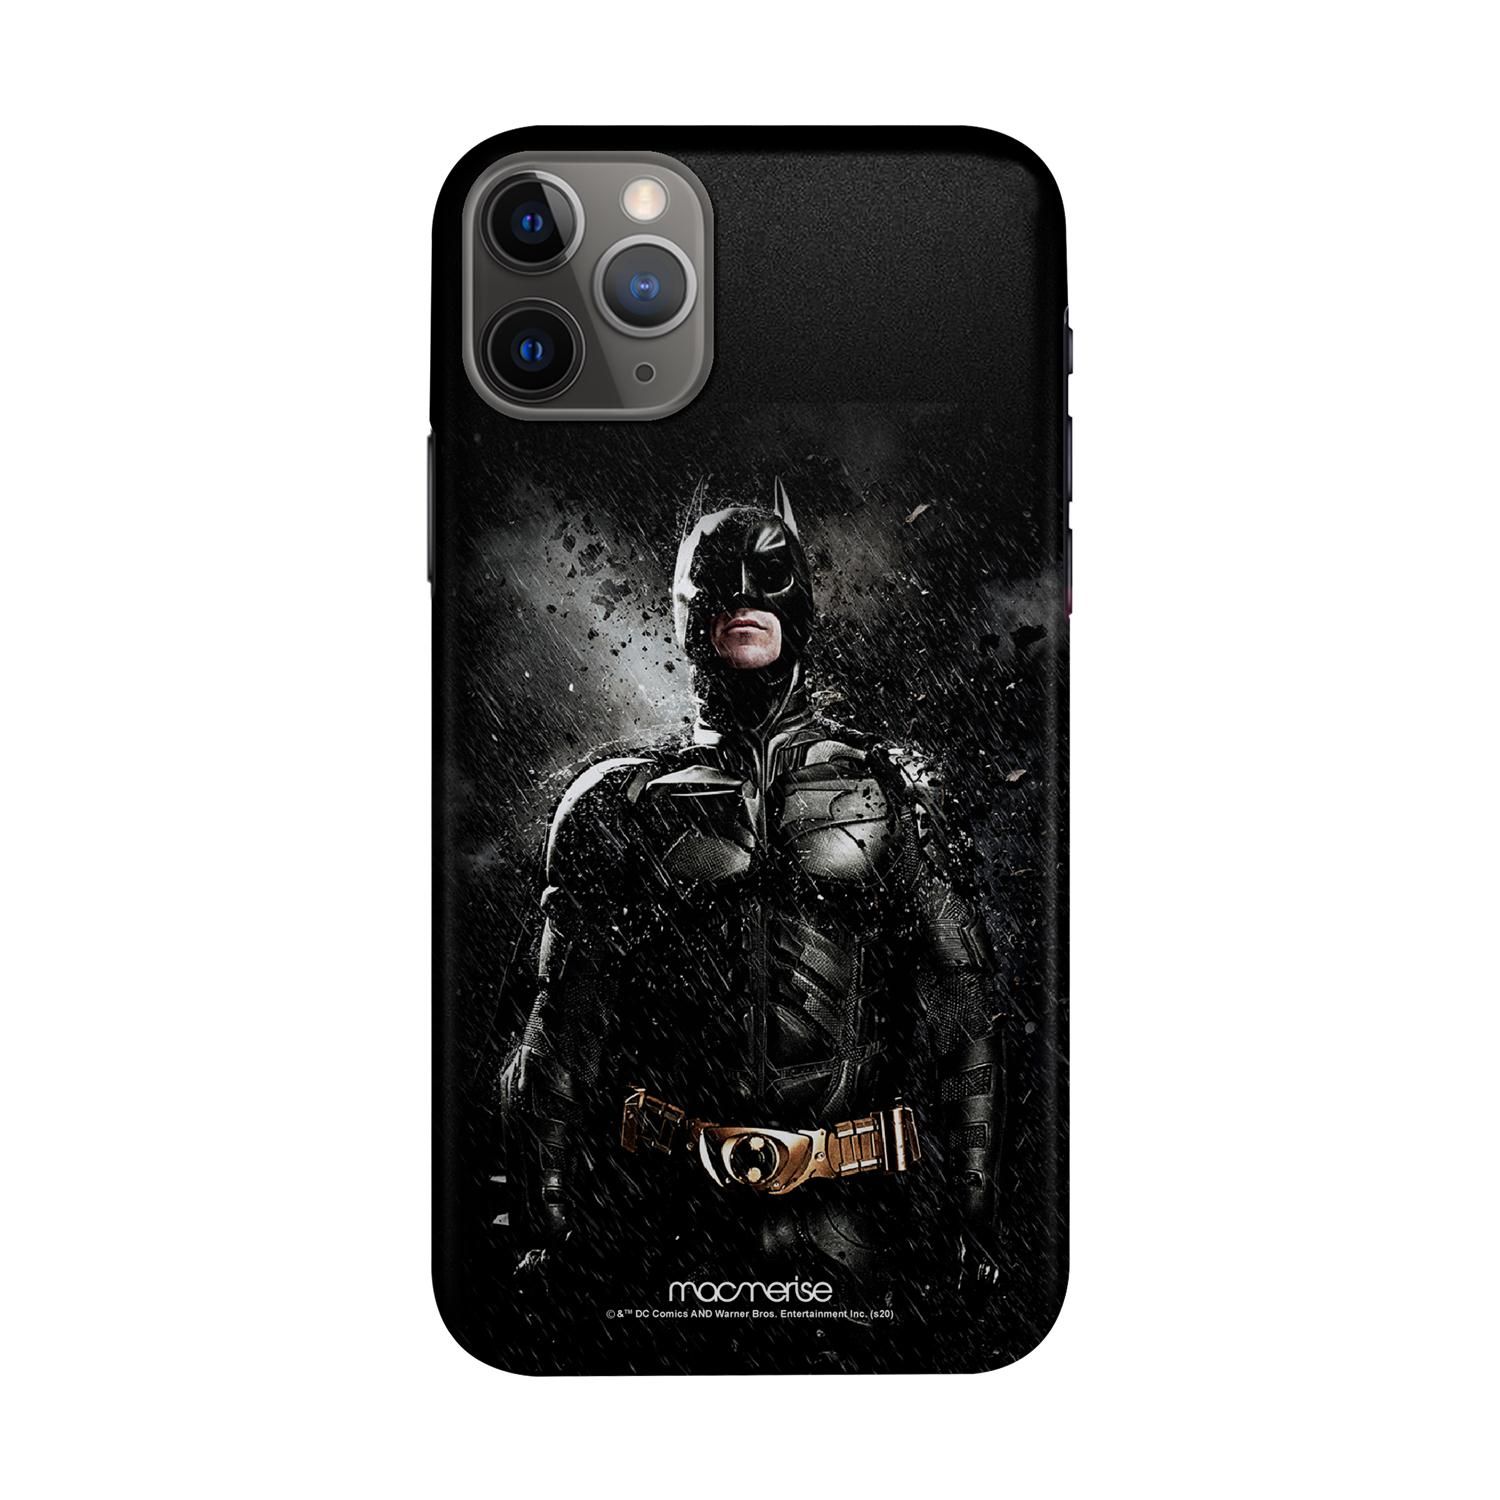 Buy Rise of Batman - Sleek Phone Case for iPhone 11 Pro Max Online